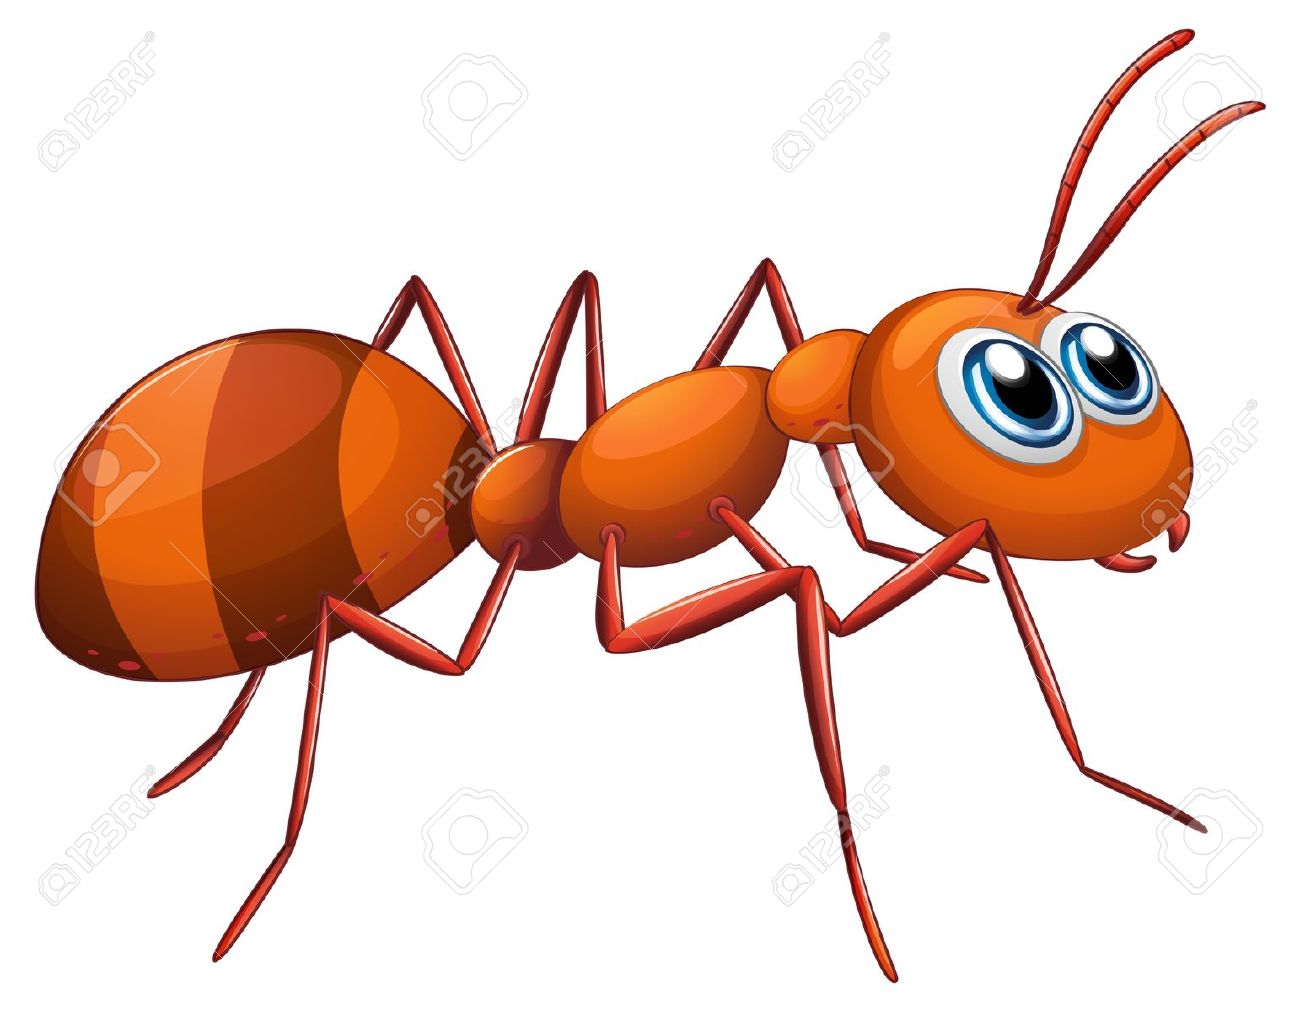 Ants clipart children's. Easily ant images for